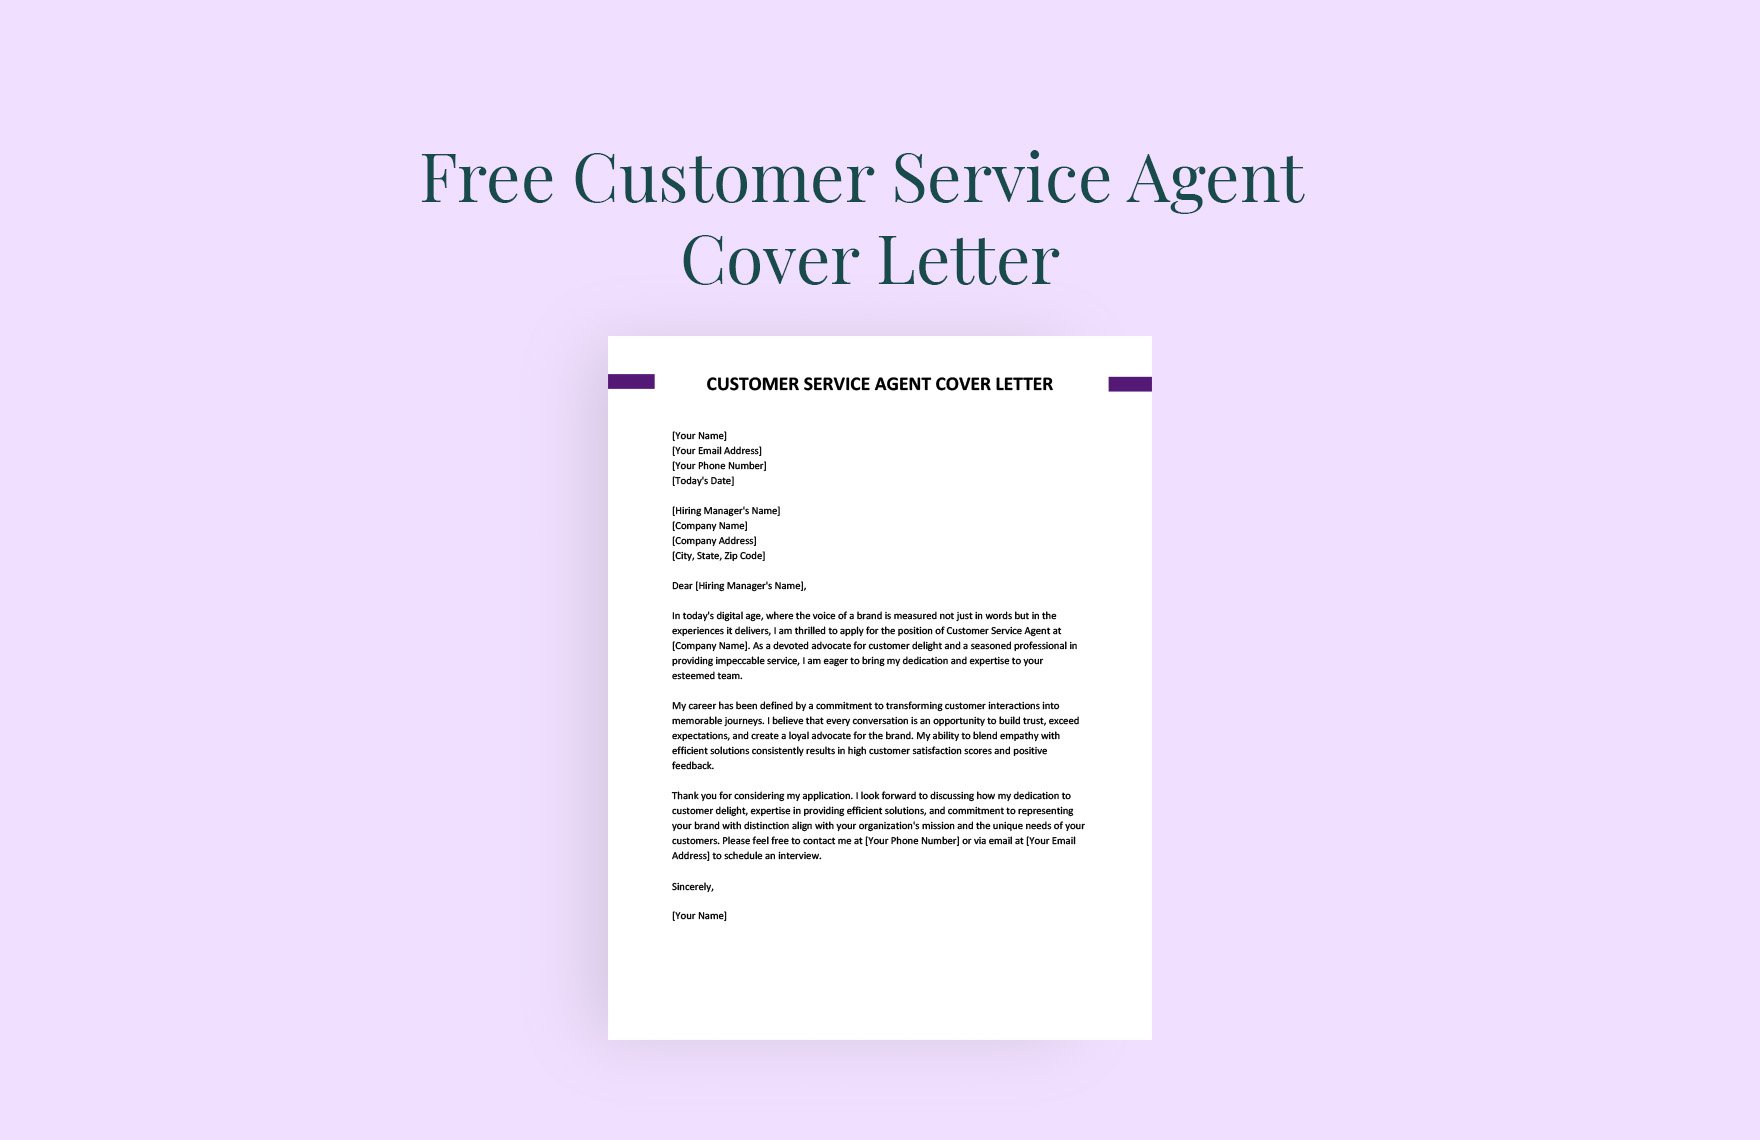 Customer Service Agent Cover Letter